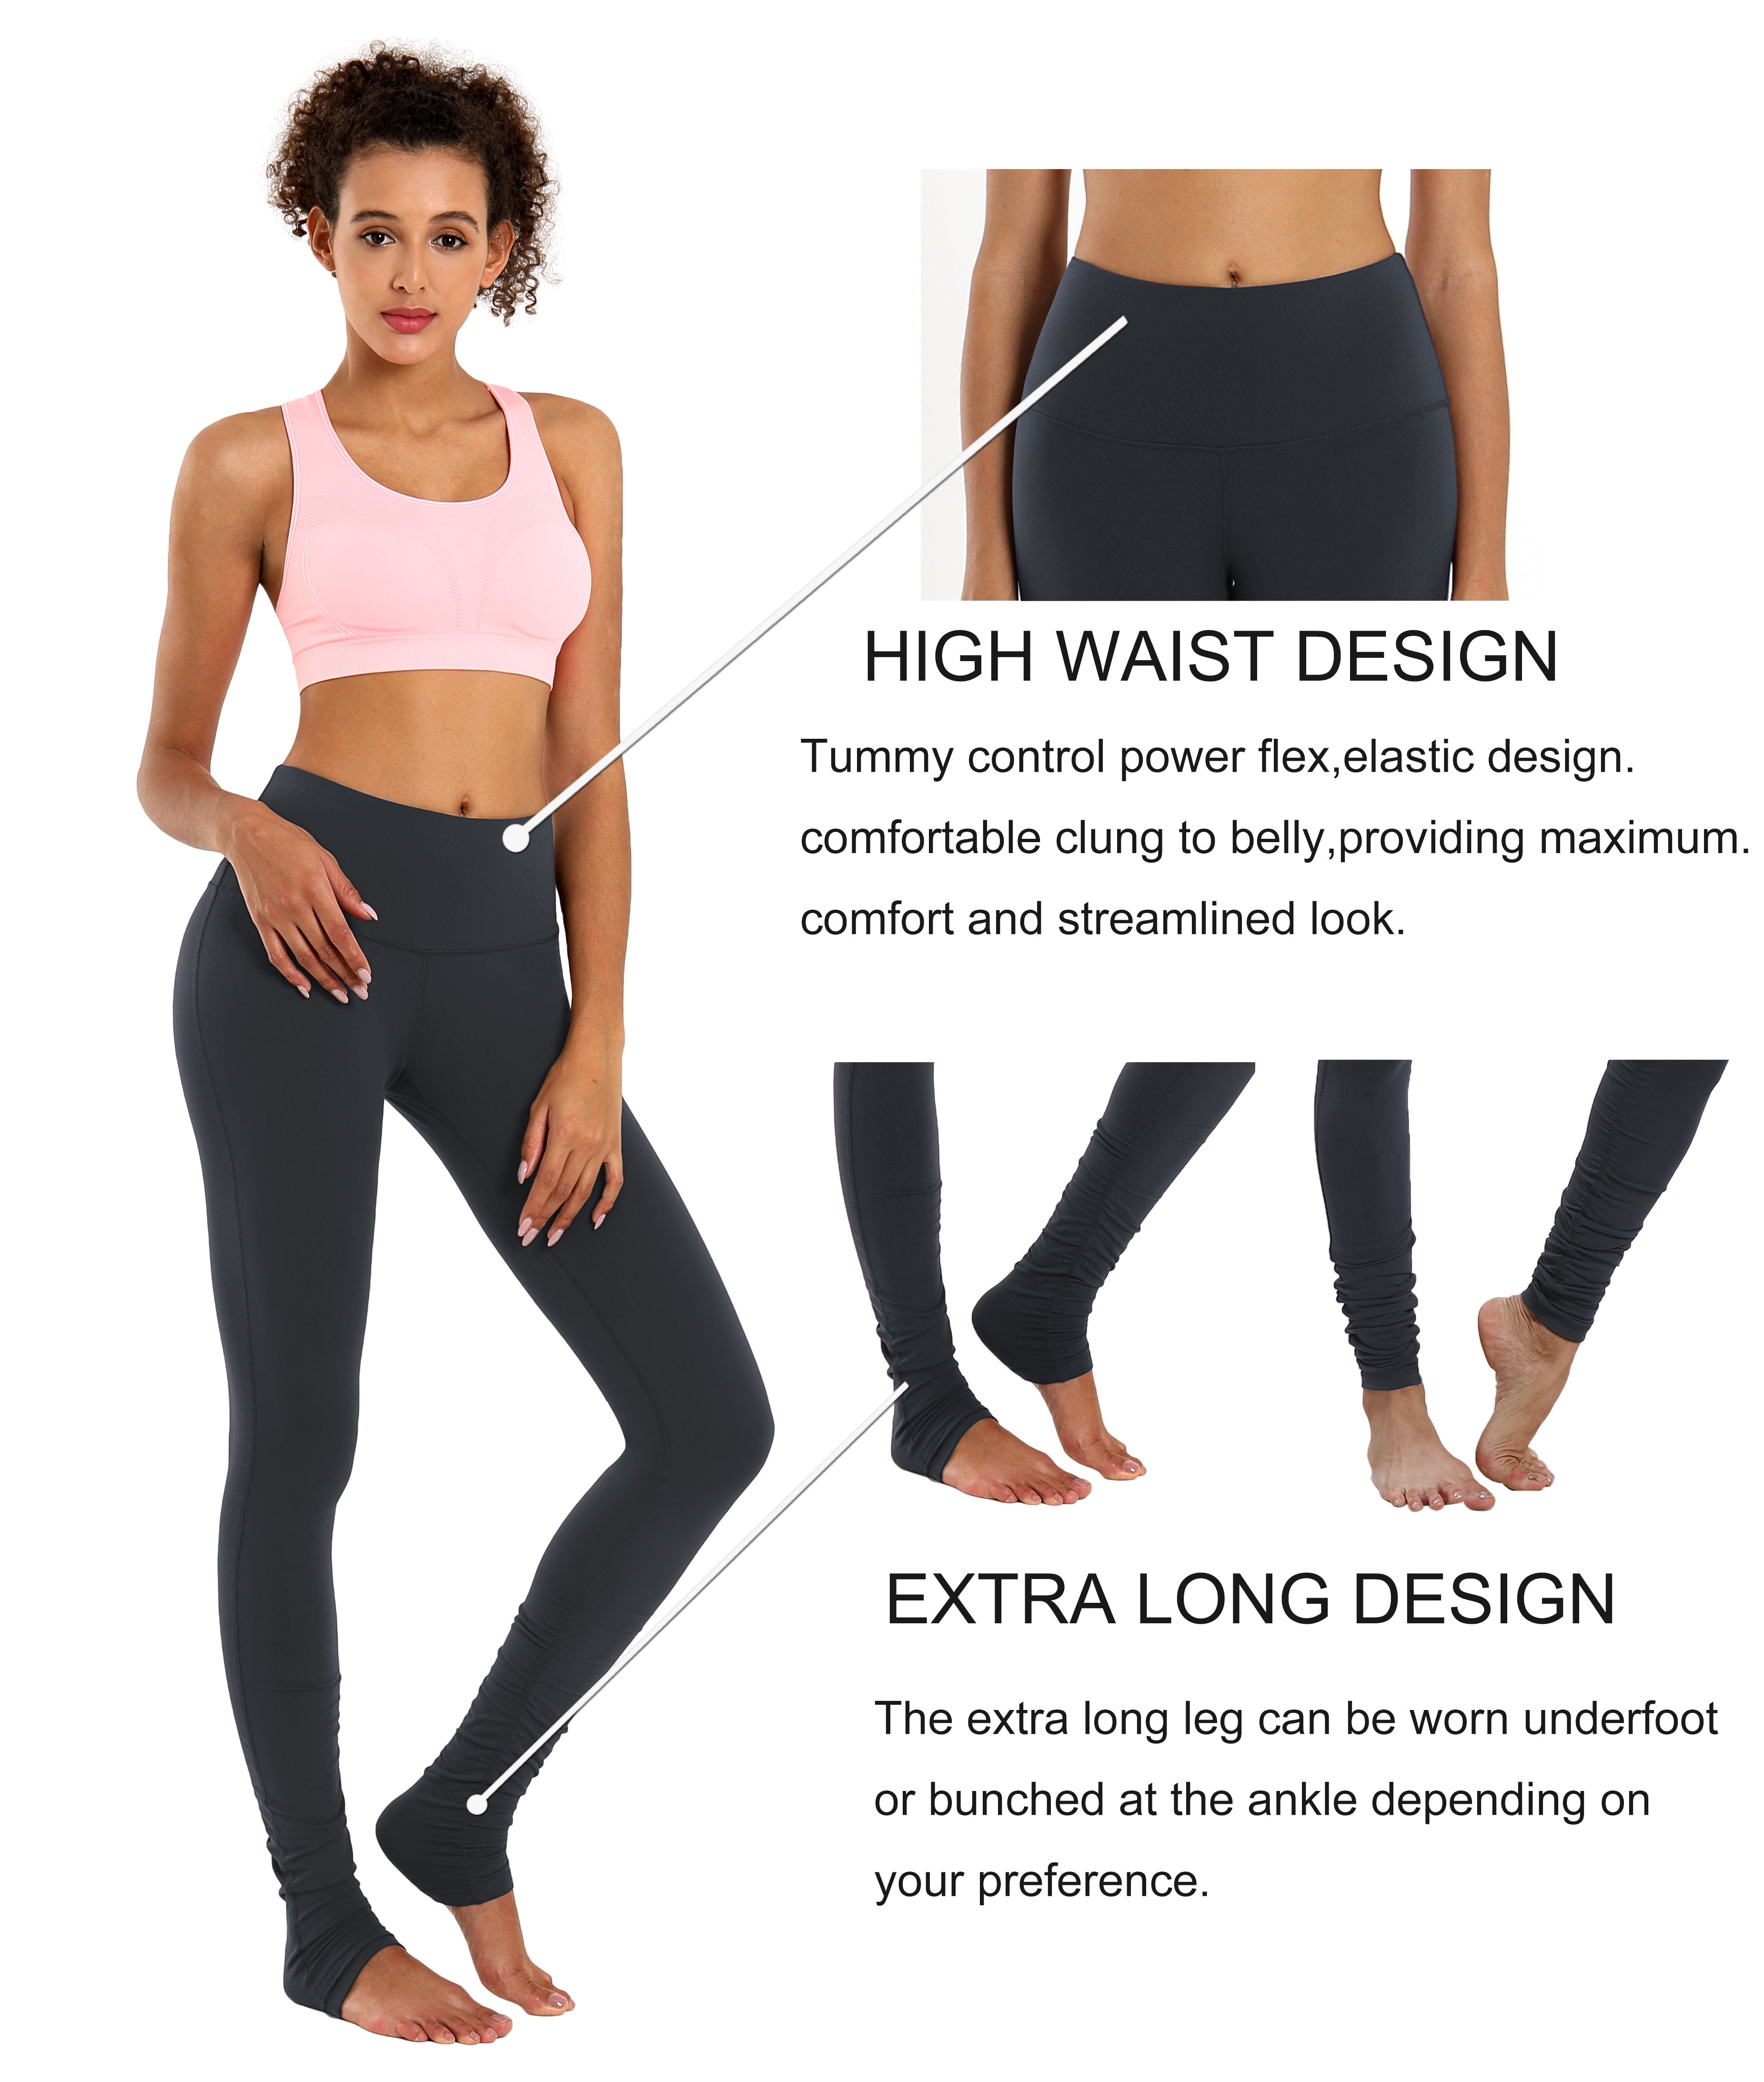 Over the Heel Biking Pants shadowcharcoal Over the Heel Design 87%Nylon/13%Spandex Fabric doesn't attract lint easily 4-way stretch No see-through Moisture-wicking Tummy control